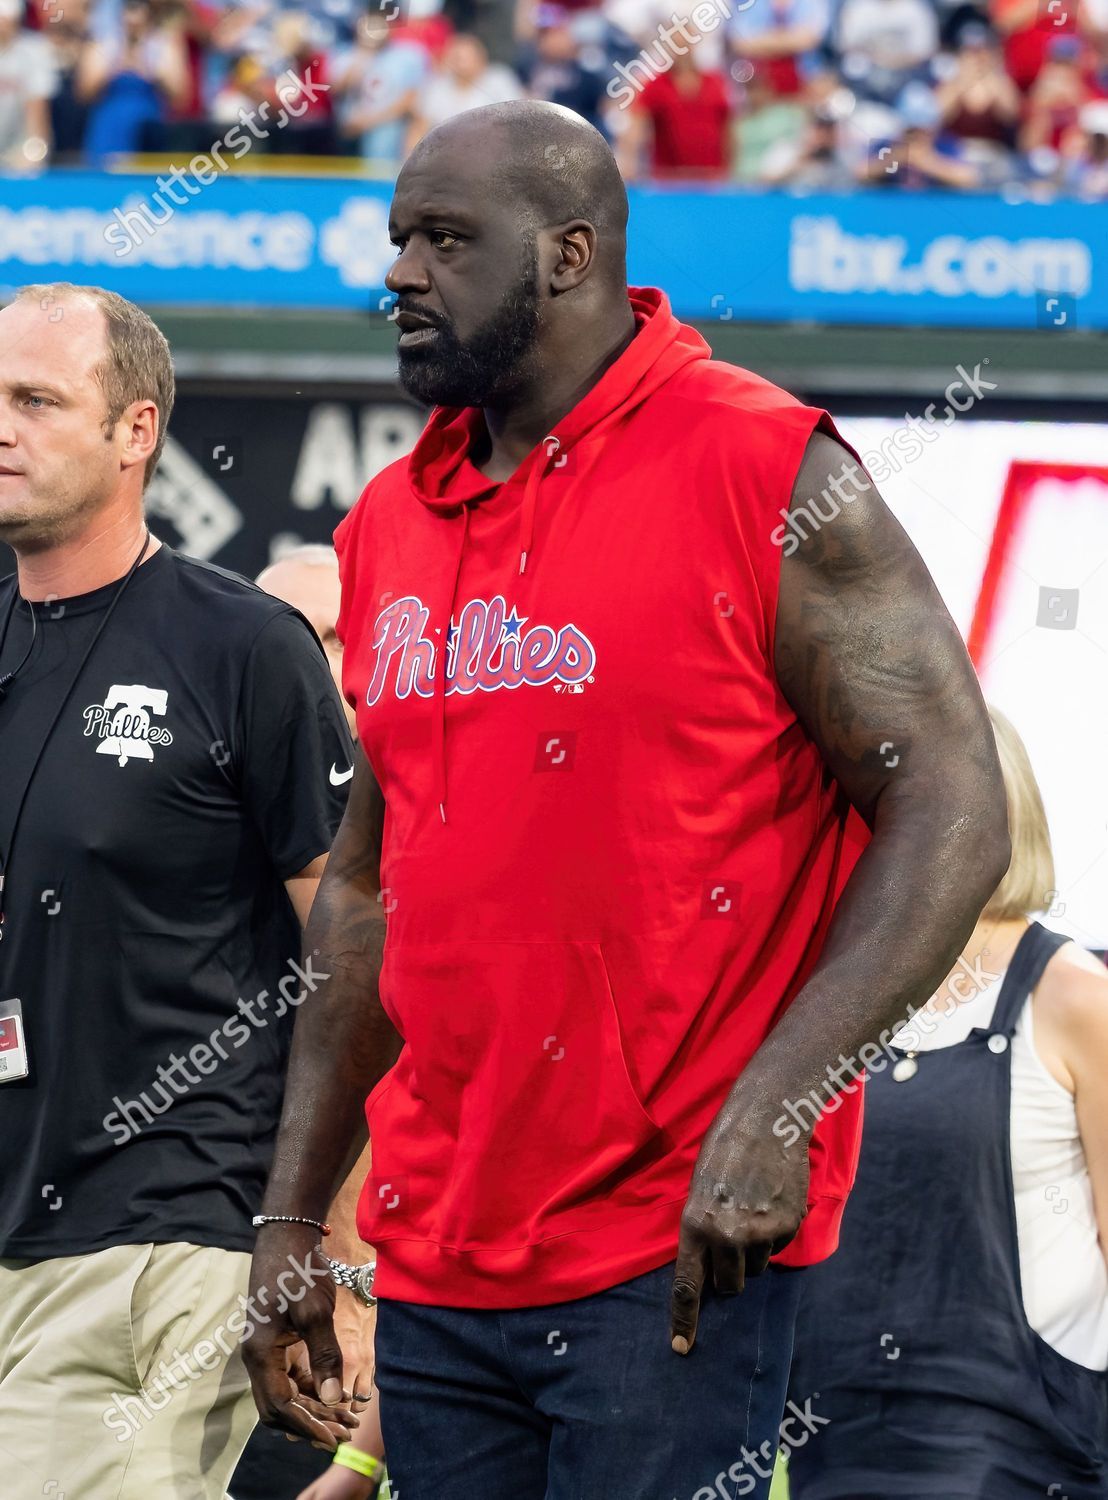 The Diesel, aka Shaquille O'Neal, roars into Belly Up for soldout Saturday  night show